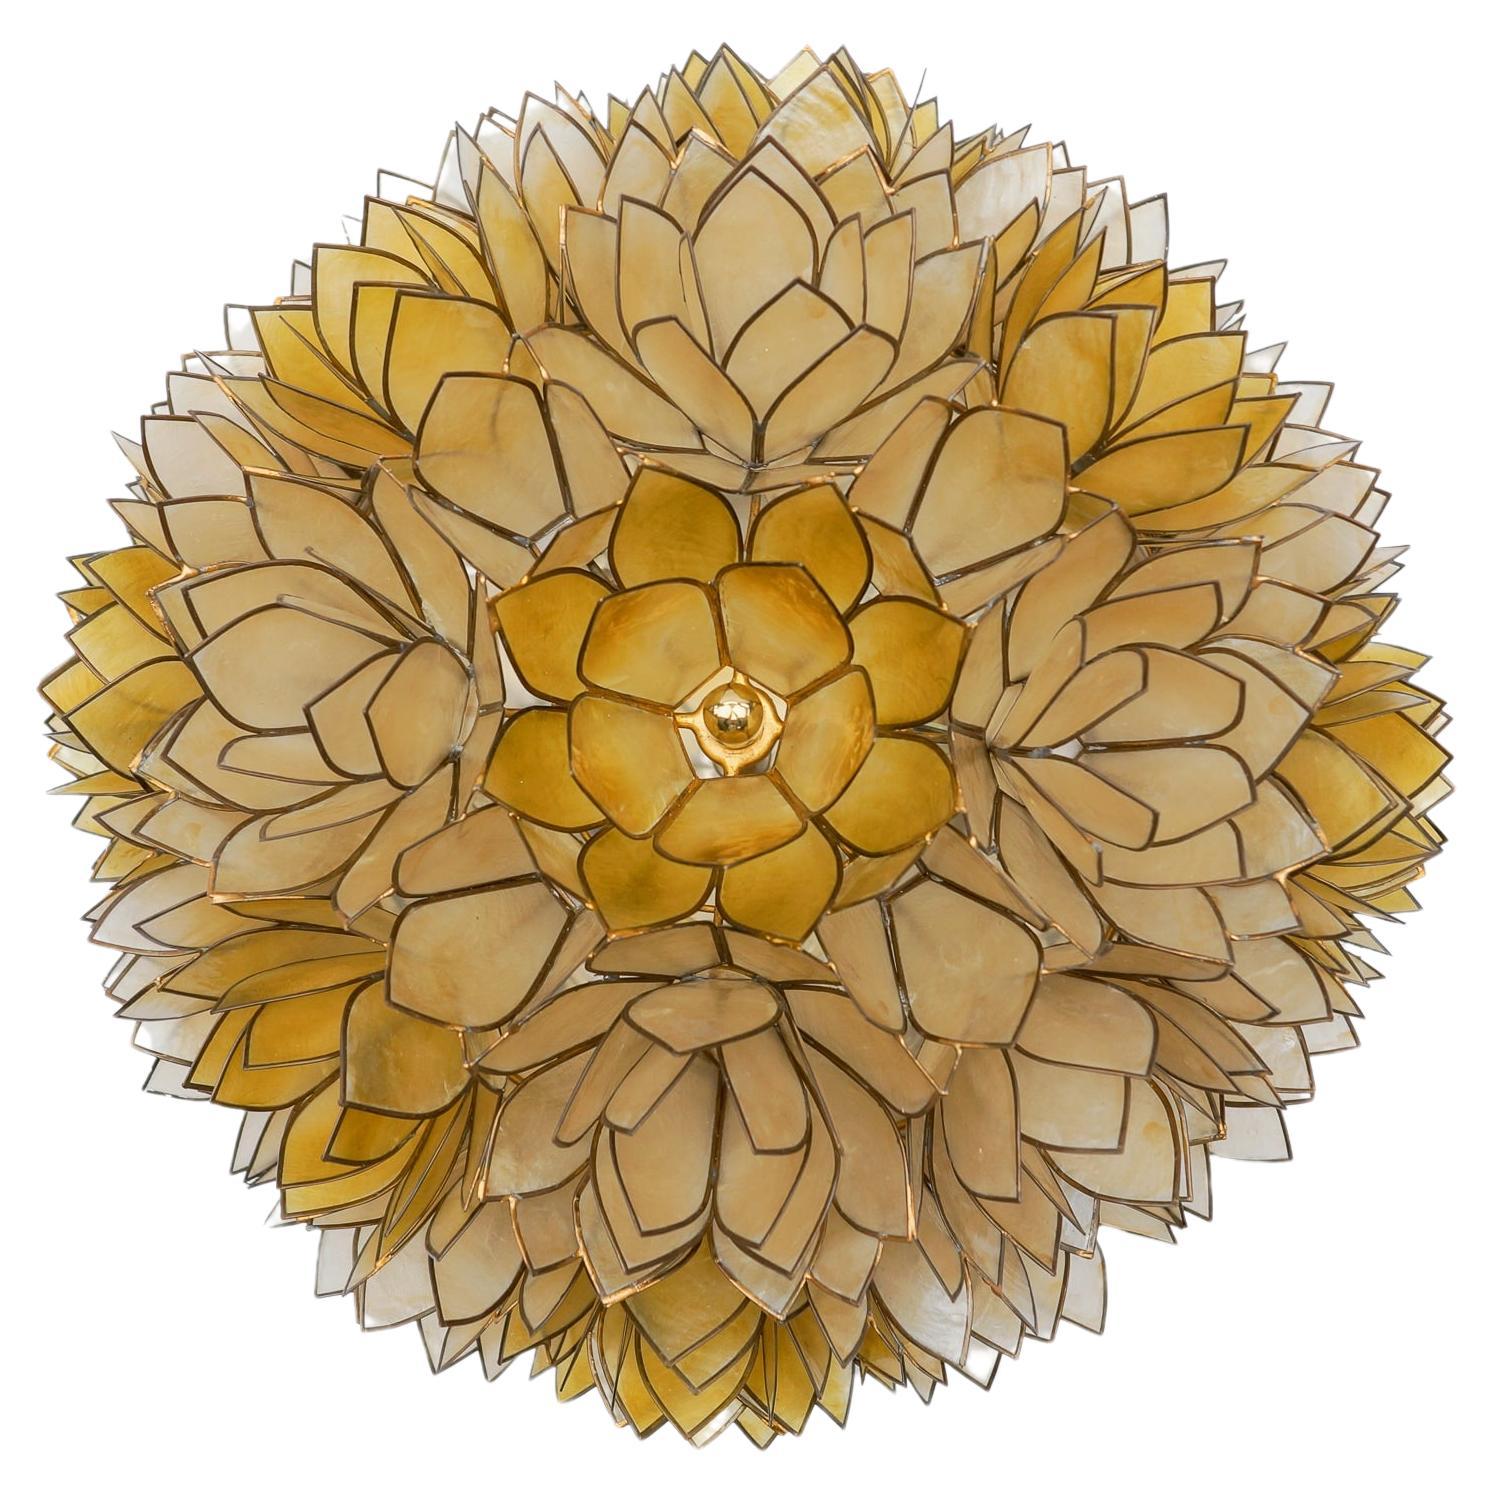 Flower Spherical Wall or Ceiling Lamps Made of Mother-of-Pearl in Yellow, 1960s For Sale